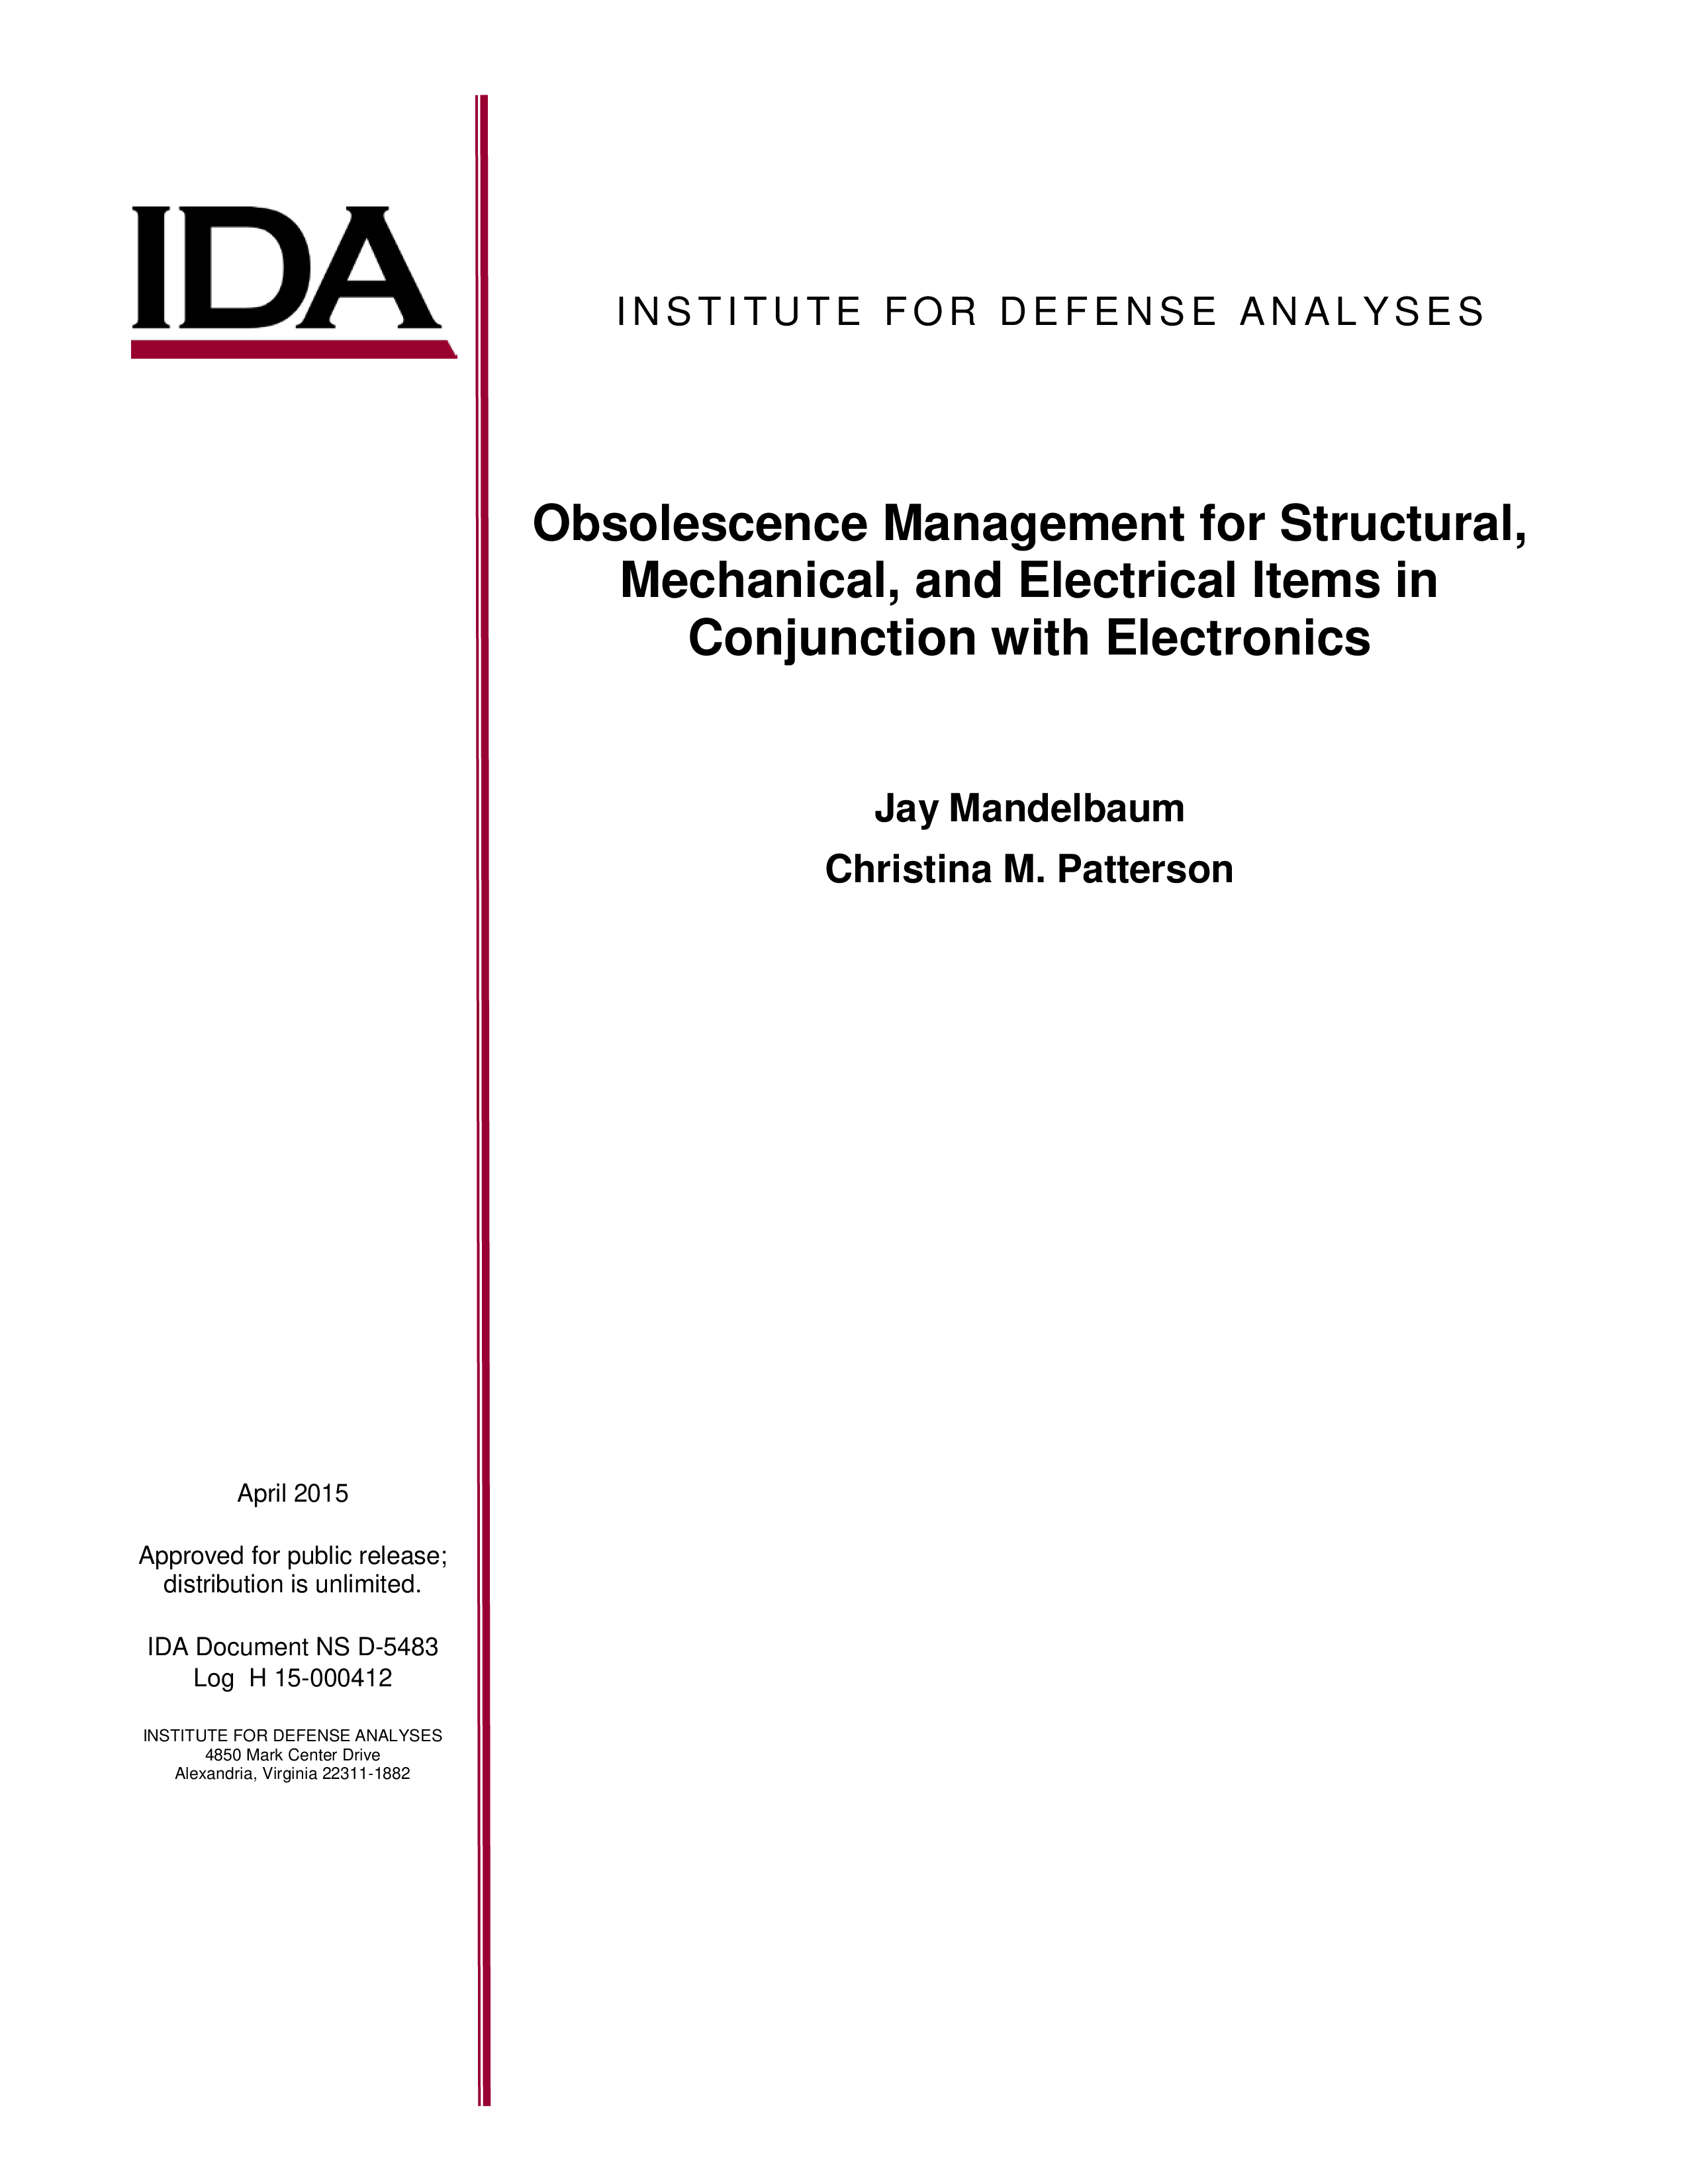 Obsolescence Management for Structural, Mechanical, and Electrical Items in Conjunction with Electronics